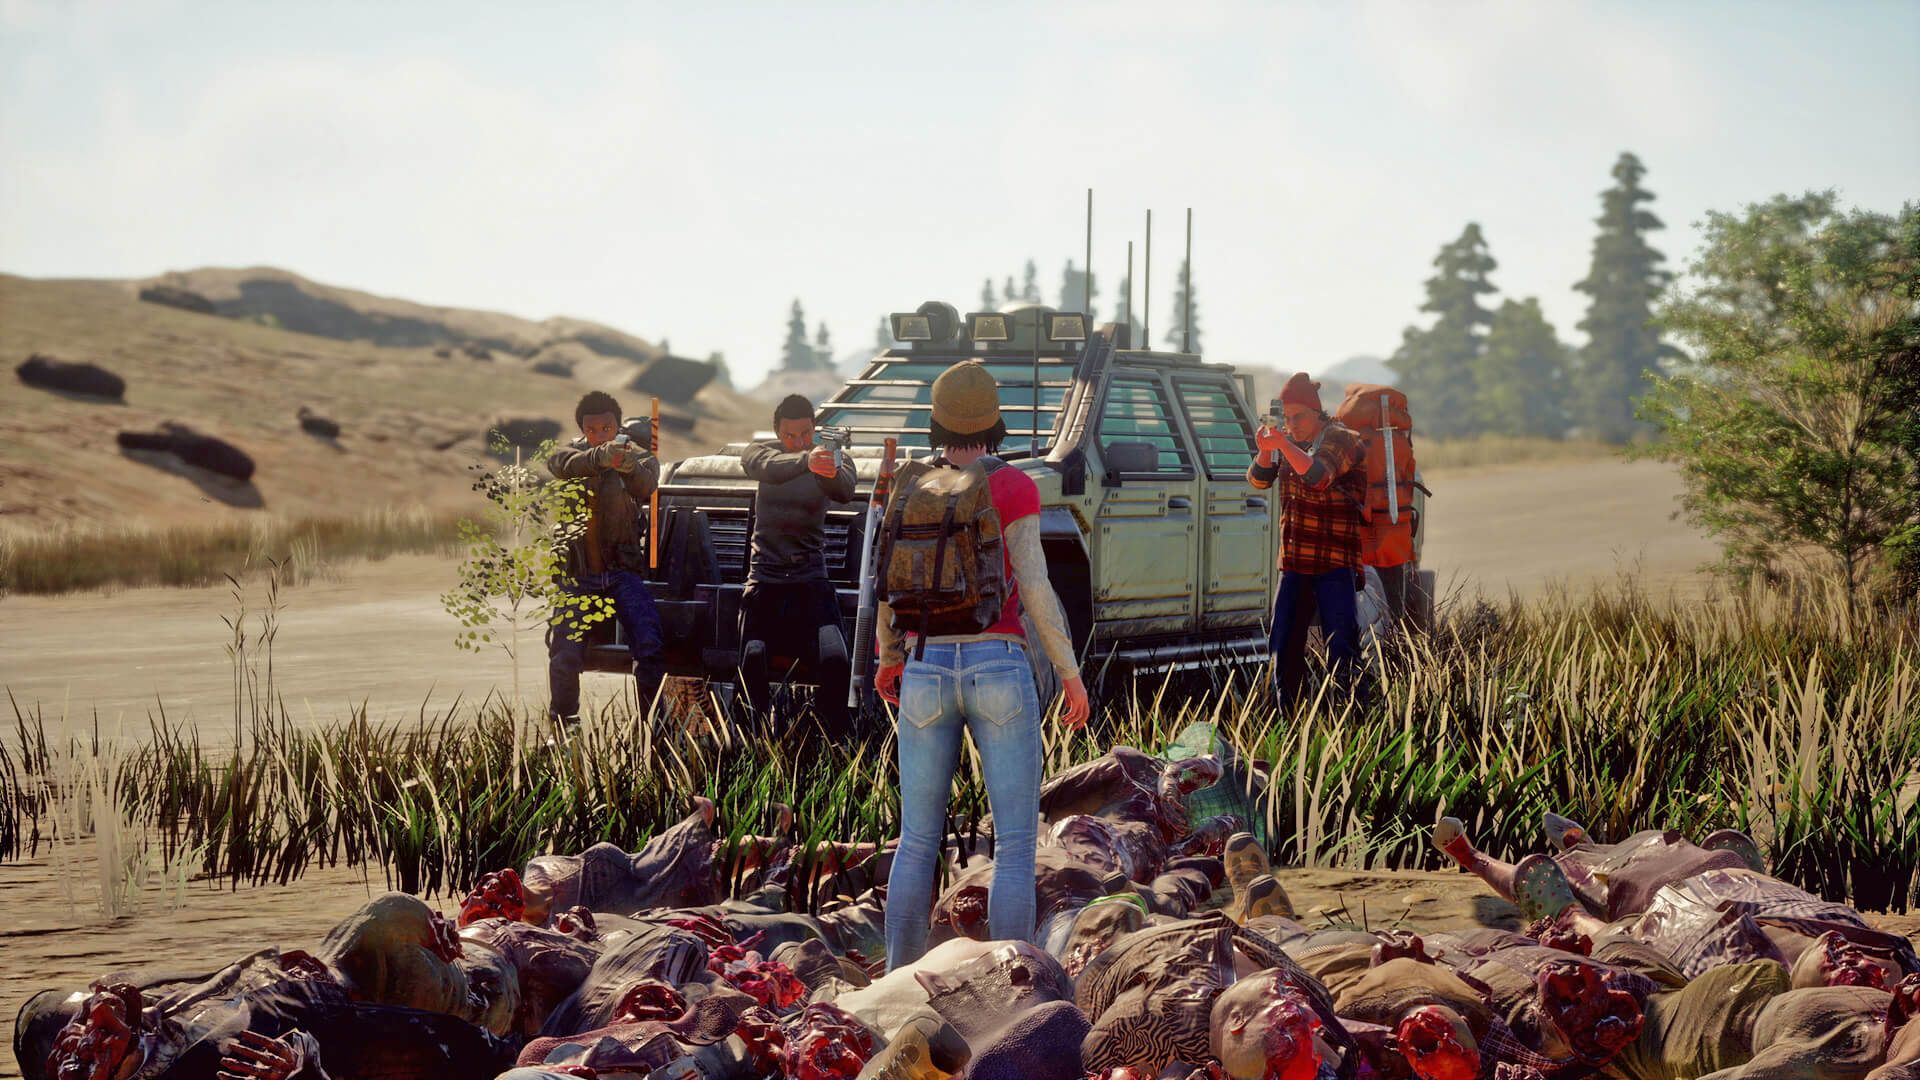 State of Decay 2: Juggernaut Edition Cheats and Trainer for Xbox